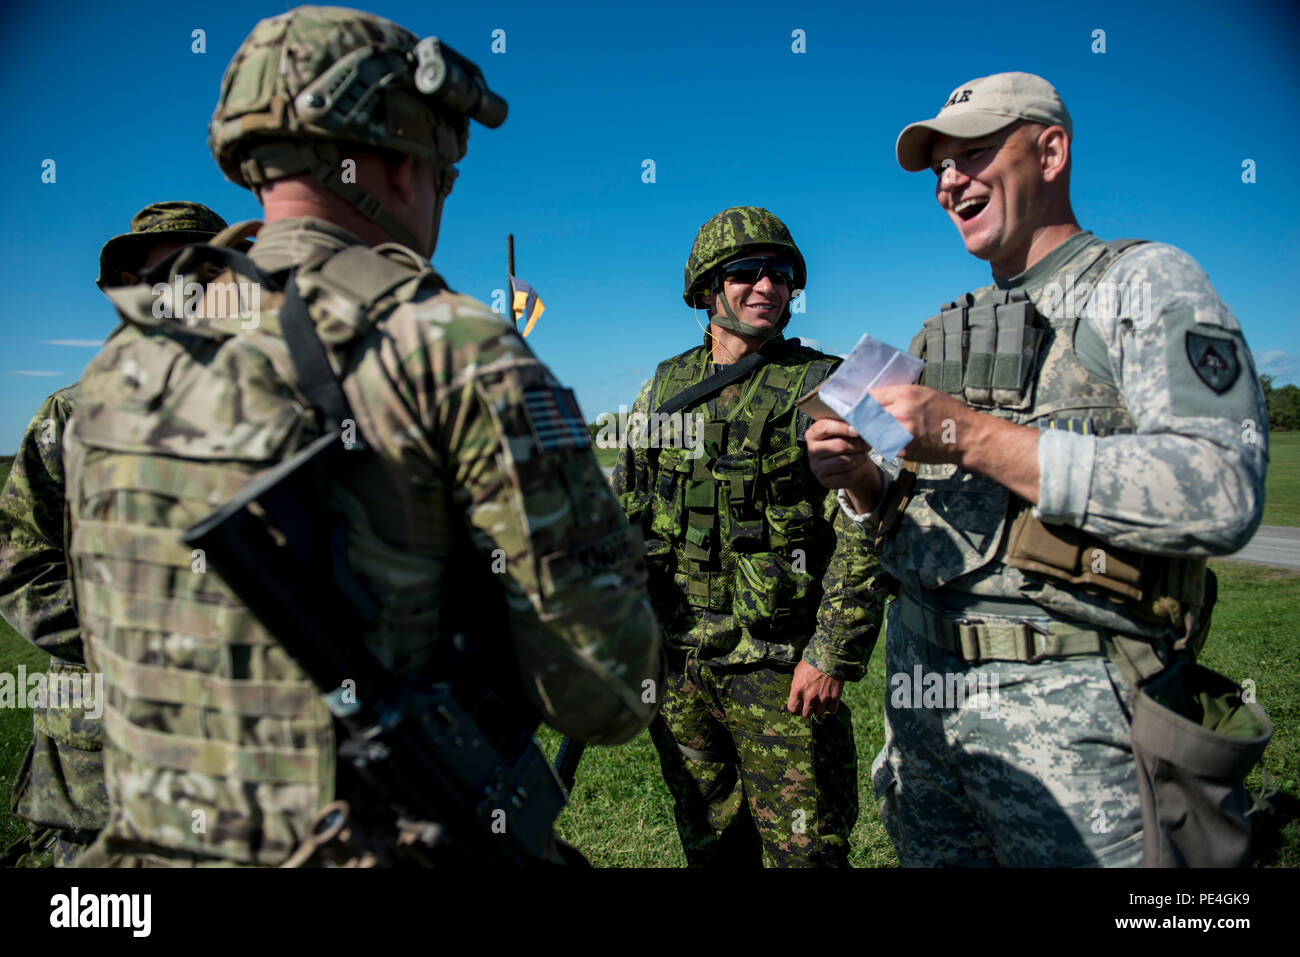 Chief Warrant Officer Two Andy Knote (left), of North Chicago, and Staff Sgt. Jason Godel, of San Antonio, U.S. Army Reserve International Combat Team competitors, joke around with Canadian Army soldiers before taking on a 7-kilometer Rifle Military Biathlon match involving several physical obstacles during the 2015 Canadian Armed Forces Small Arms Concentration at the Connaught Range outside of Ottawa, Canada, Sept. 14. The international marksmanship competition lasted roughly two weeks, bringing in more than 250 total competitors from the British, Canadian and U.S. armed forces competing in  Stock Photo